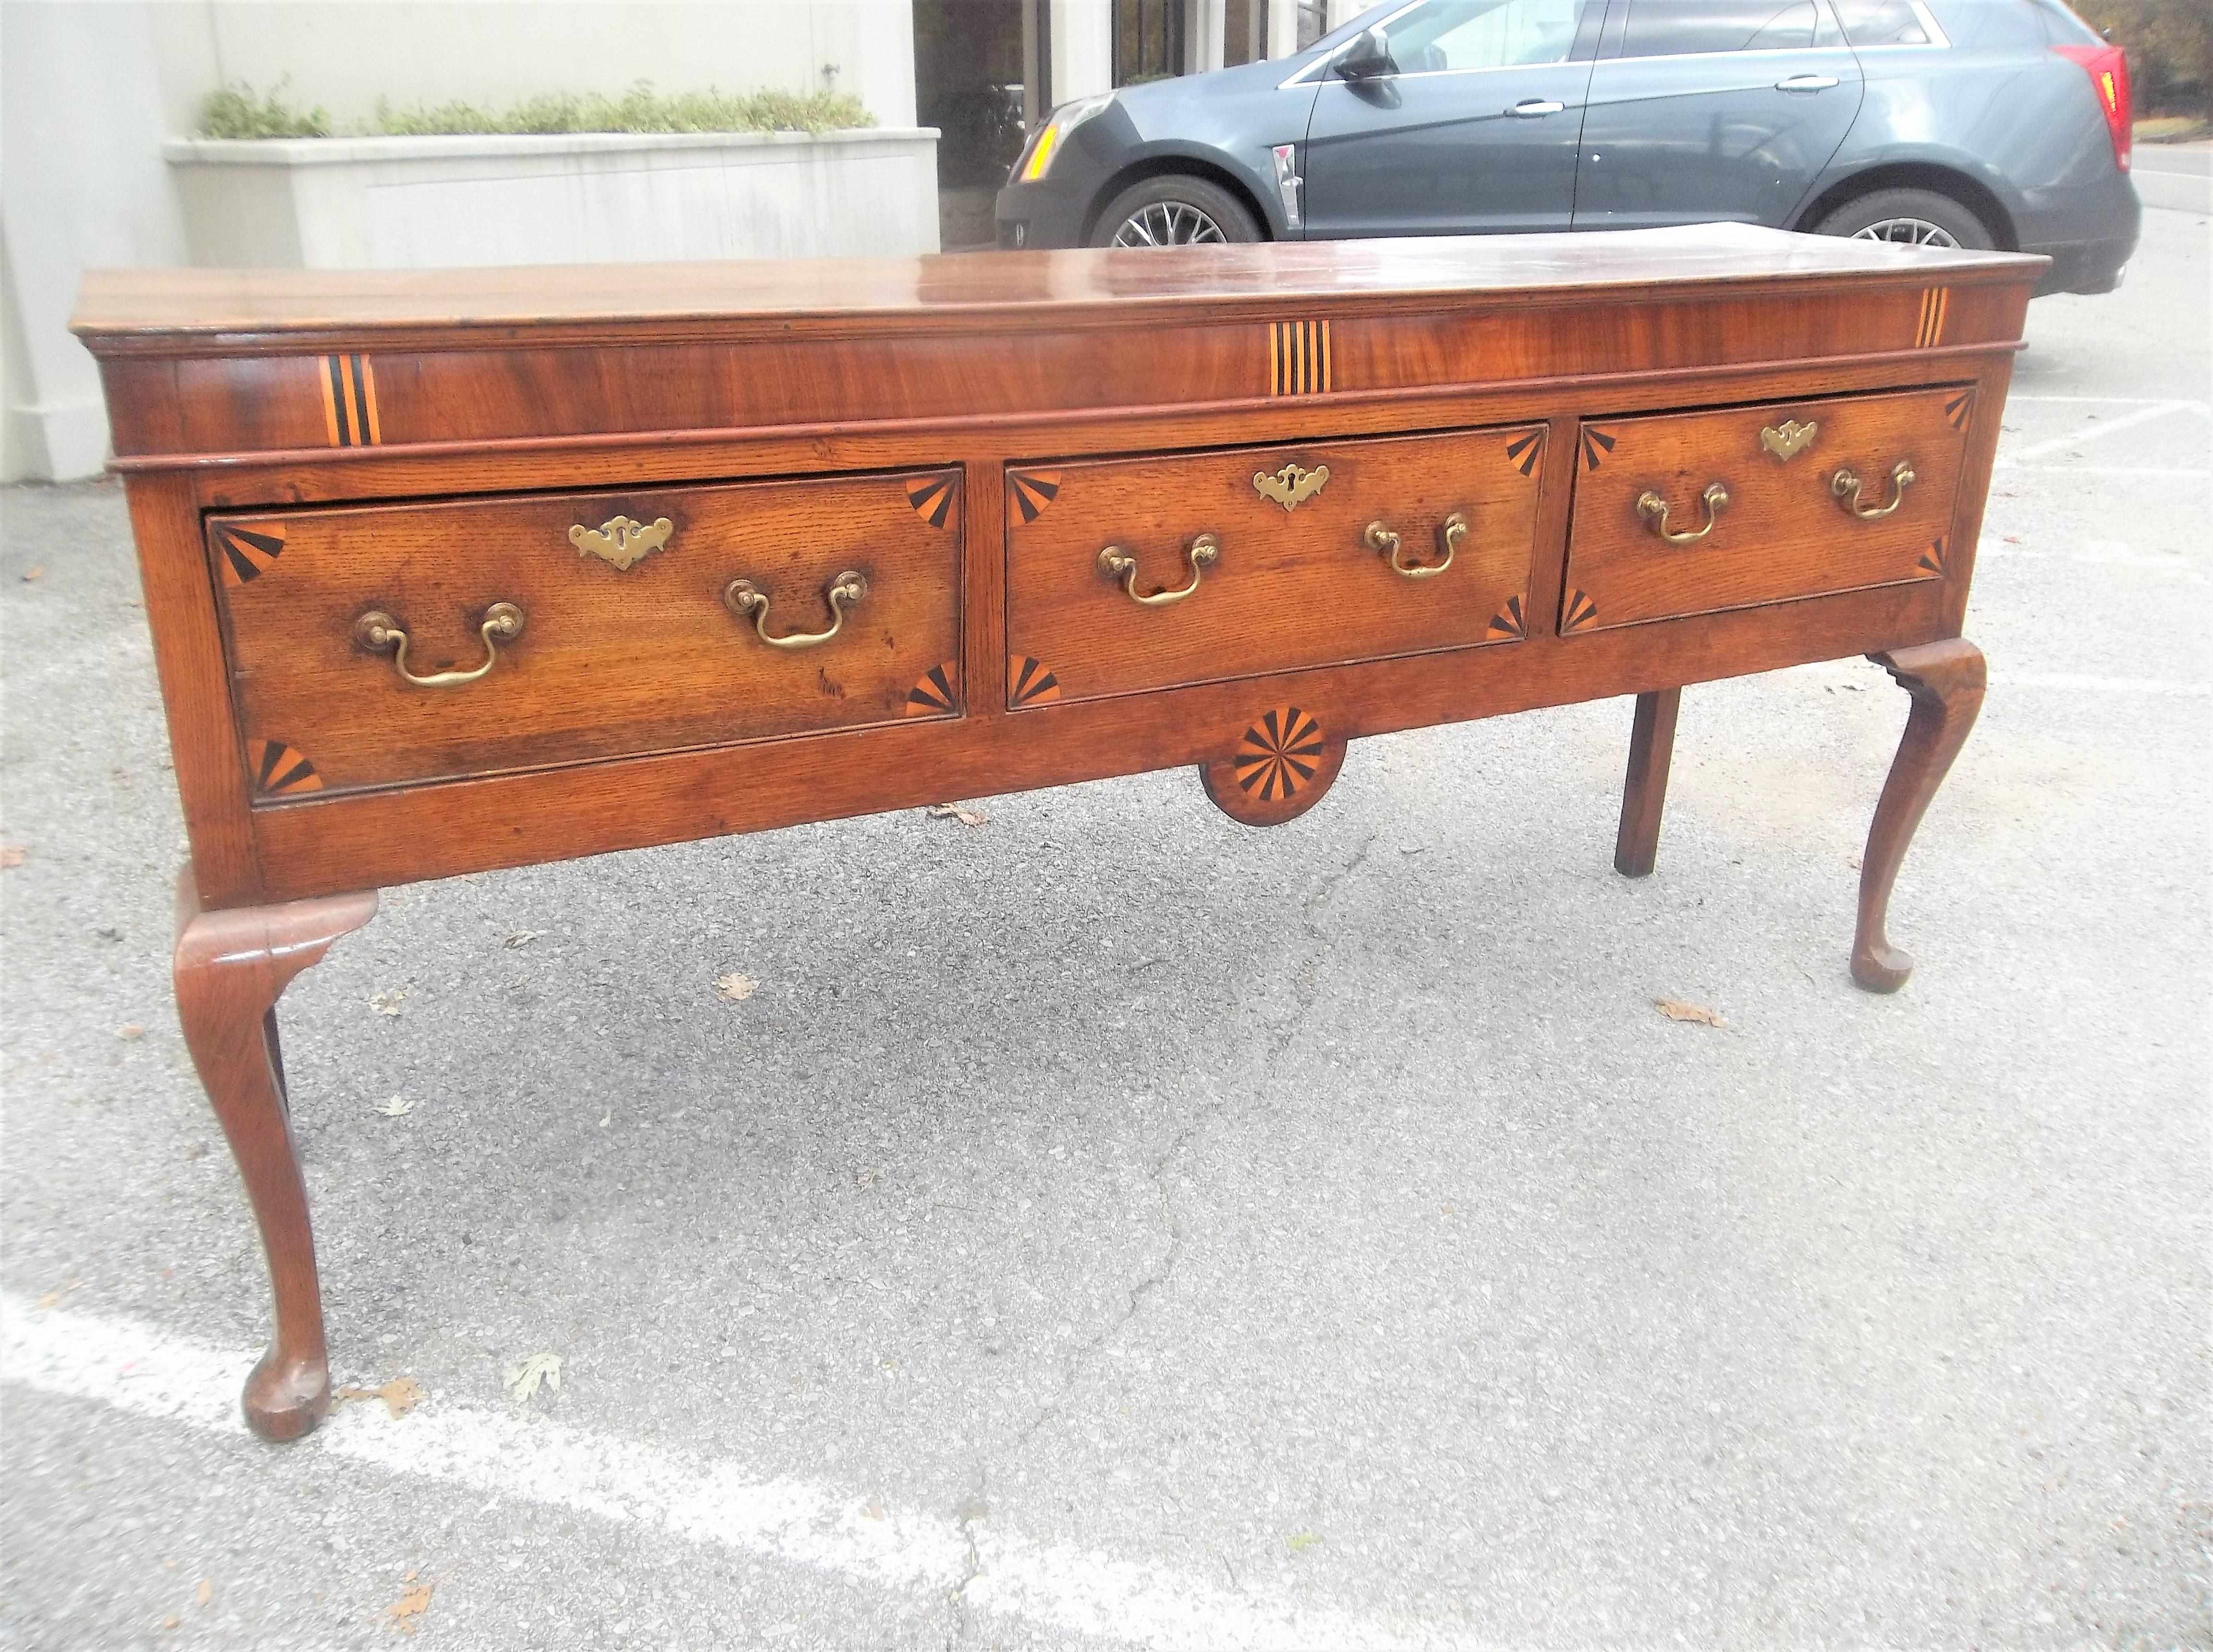 With inlaid mahogany banding and fan inlaid drawers. Tall for a dresser base, more of sideboard height. Hand-cut dovetail to each drawer. Nice warm cognac / walnut color. Typical use stains to the top. Some fading to drawer fronts.  Solid boards